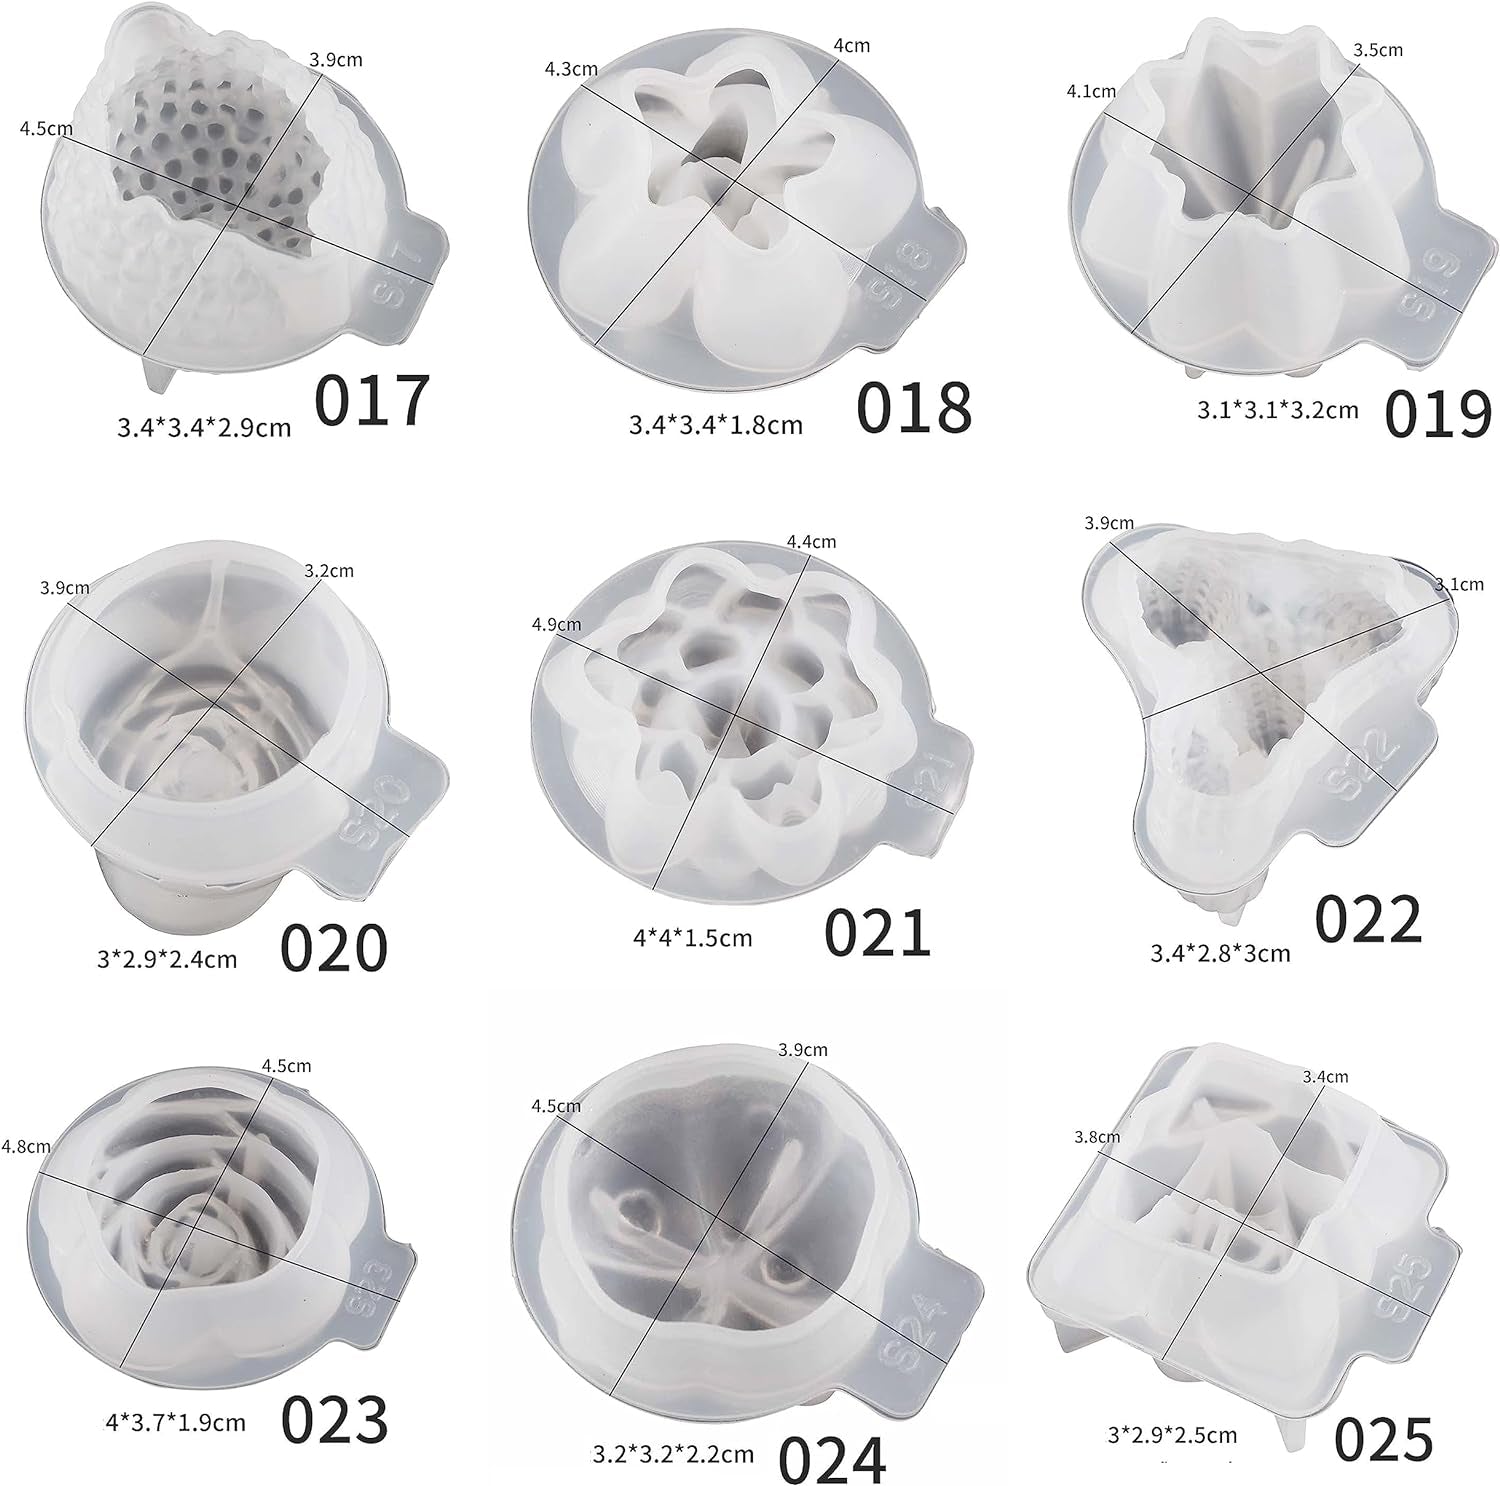 34 Pcs Succulent Candle Mold Succulent Mold Succulent Resin Mold Clay Mold Jewelry Resin Casting Mold Candle Making Molds Craft Supplies 3D Mold Silicone Mold for Resin Casting Mold